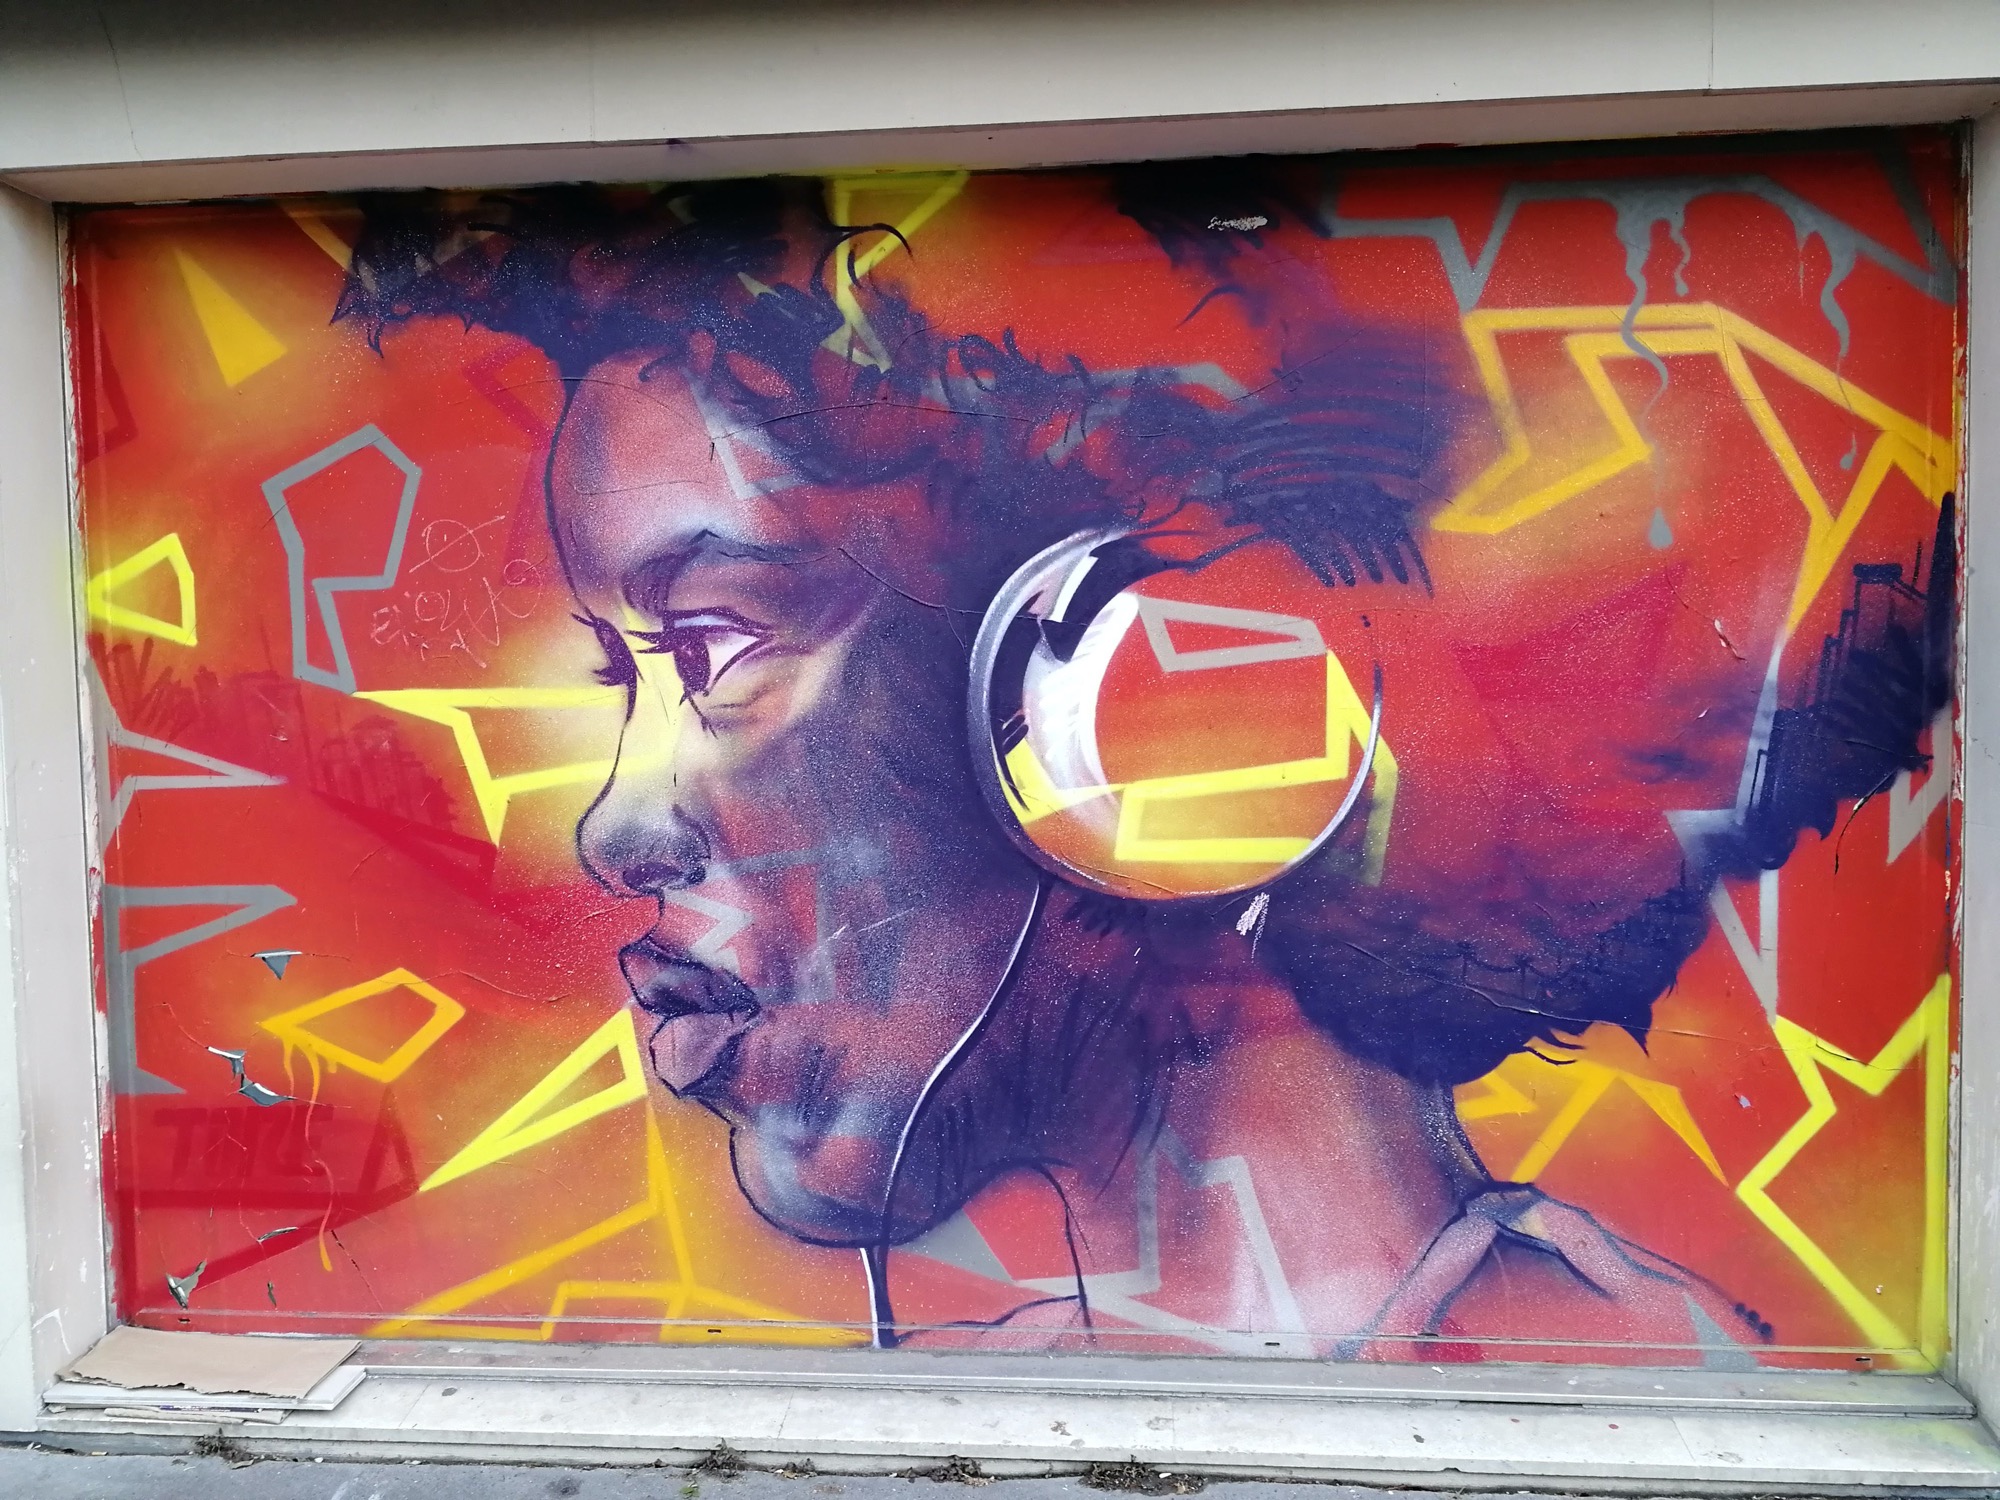 Graffiti 3238  captured by Rabot in Paris France